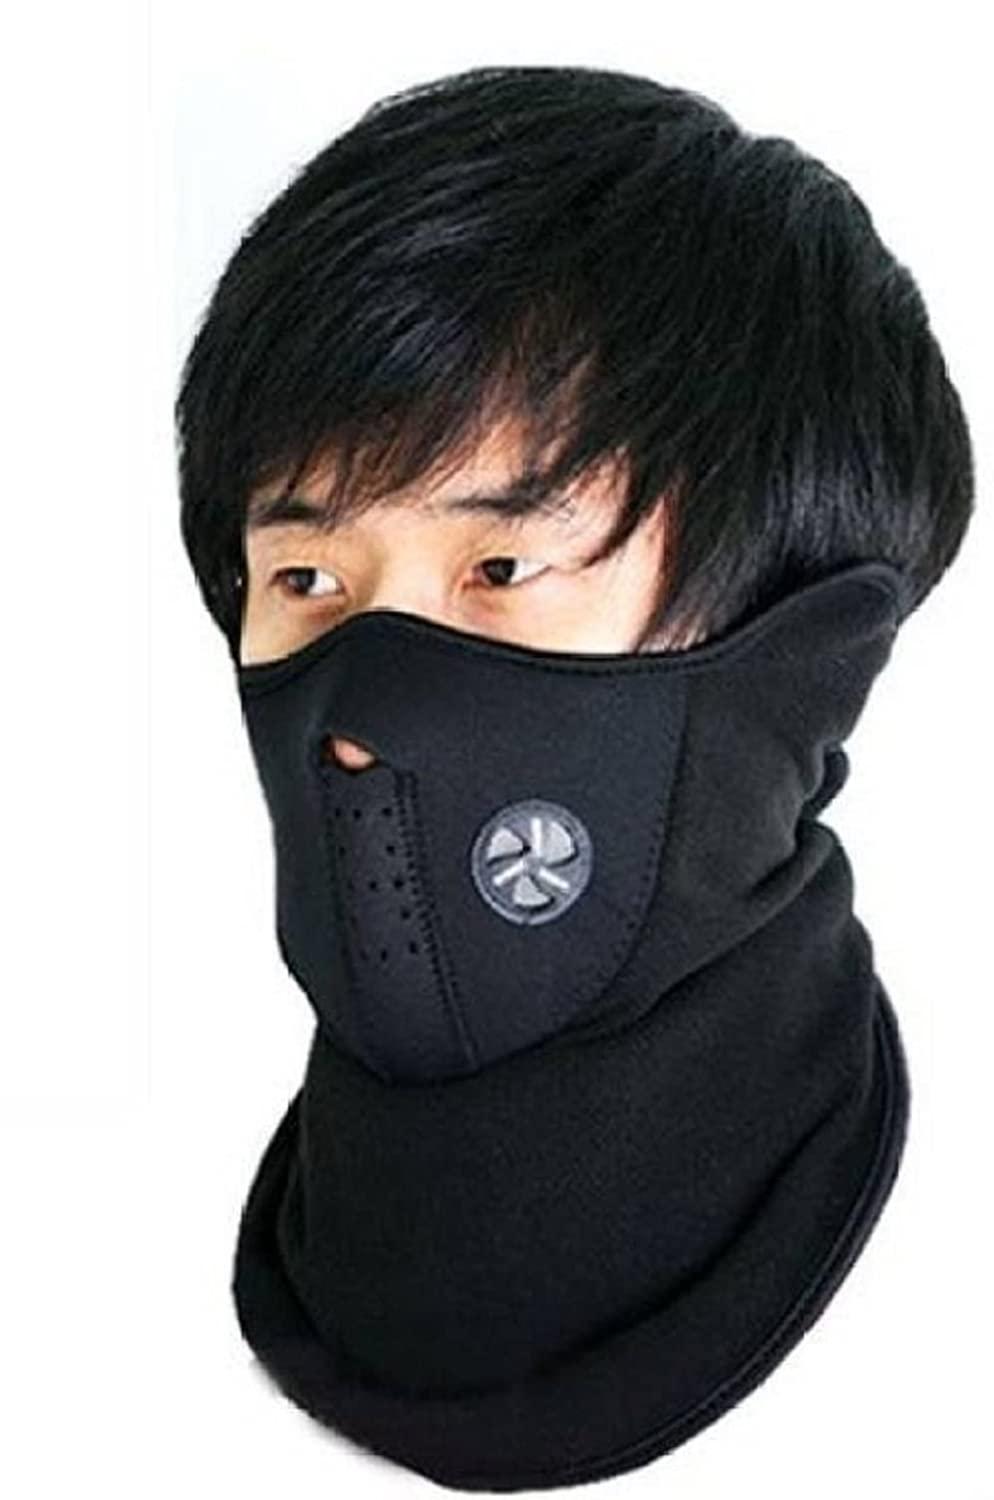 Men Soft Neoprance Fabric Reusable Motorcycle Riding Face Cover Skin protection Balaclava Mask for Bikers UV Anti Dust Neck gaiter For Sports outdoor activity Pack of 1 Neoprance Mask